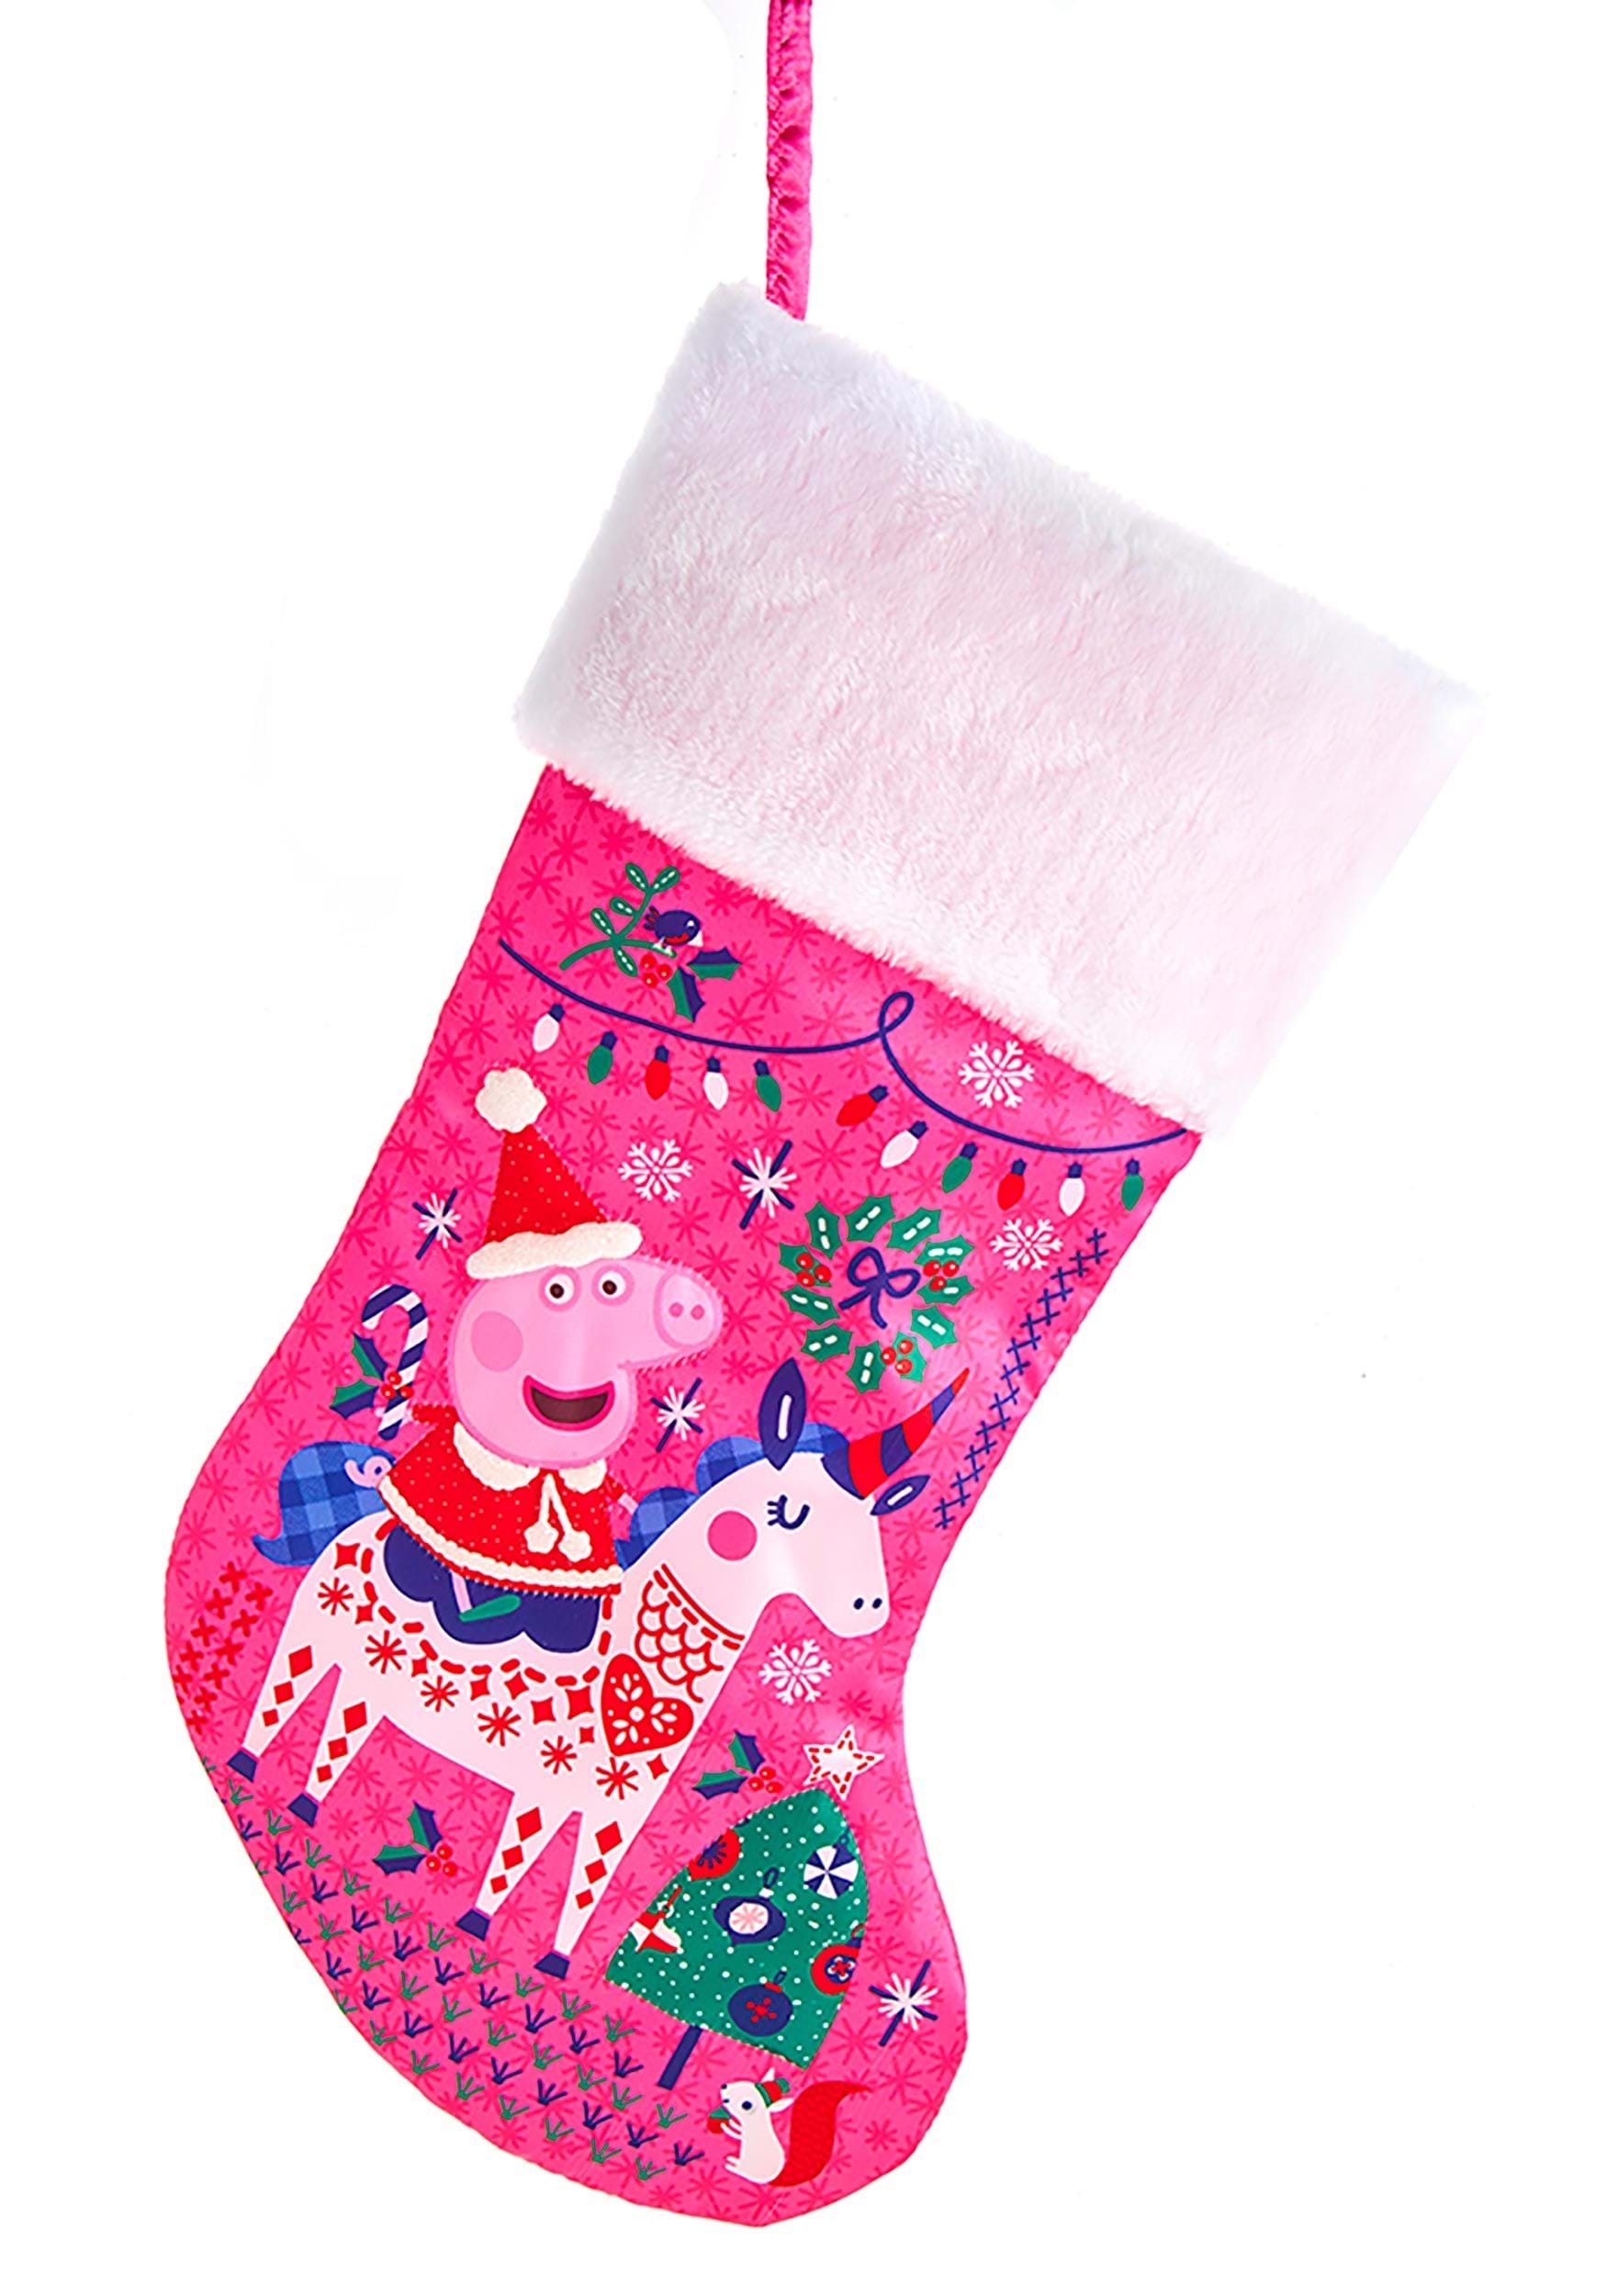 19 Inch Peppa Pig Stocking with Cuff | Holiday Decorations